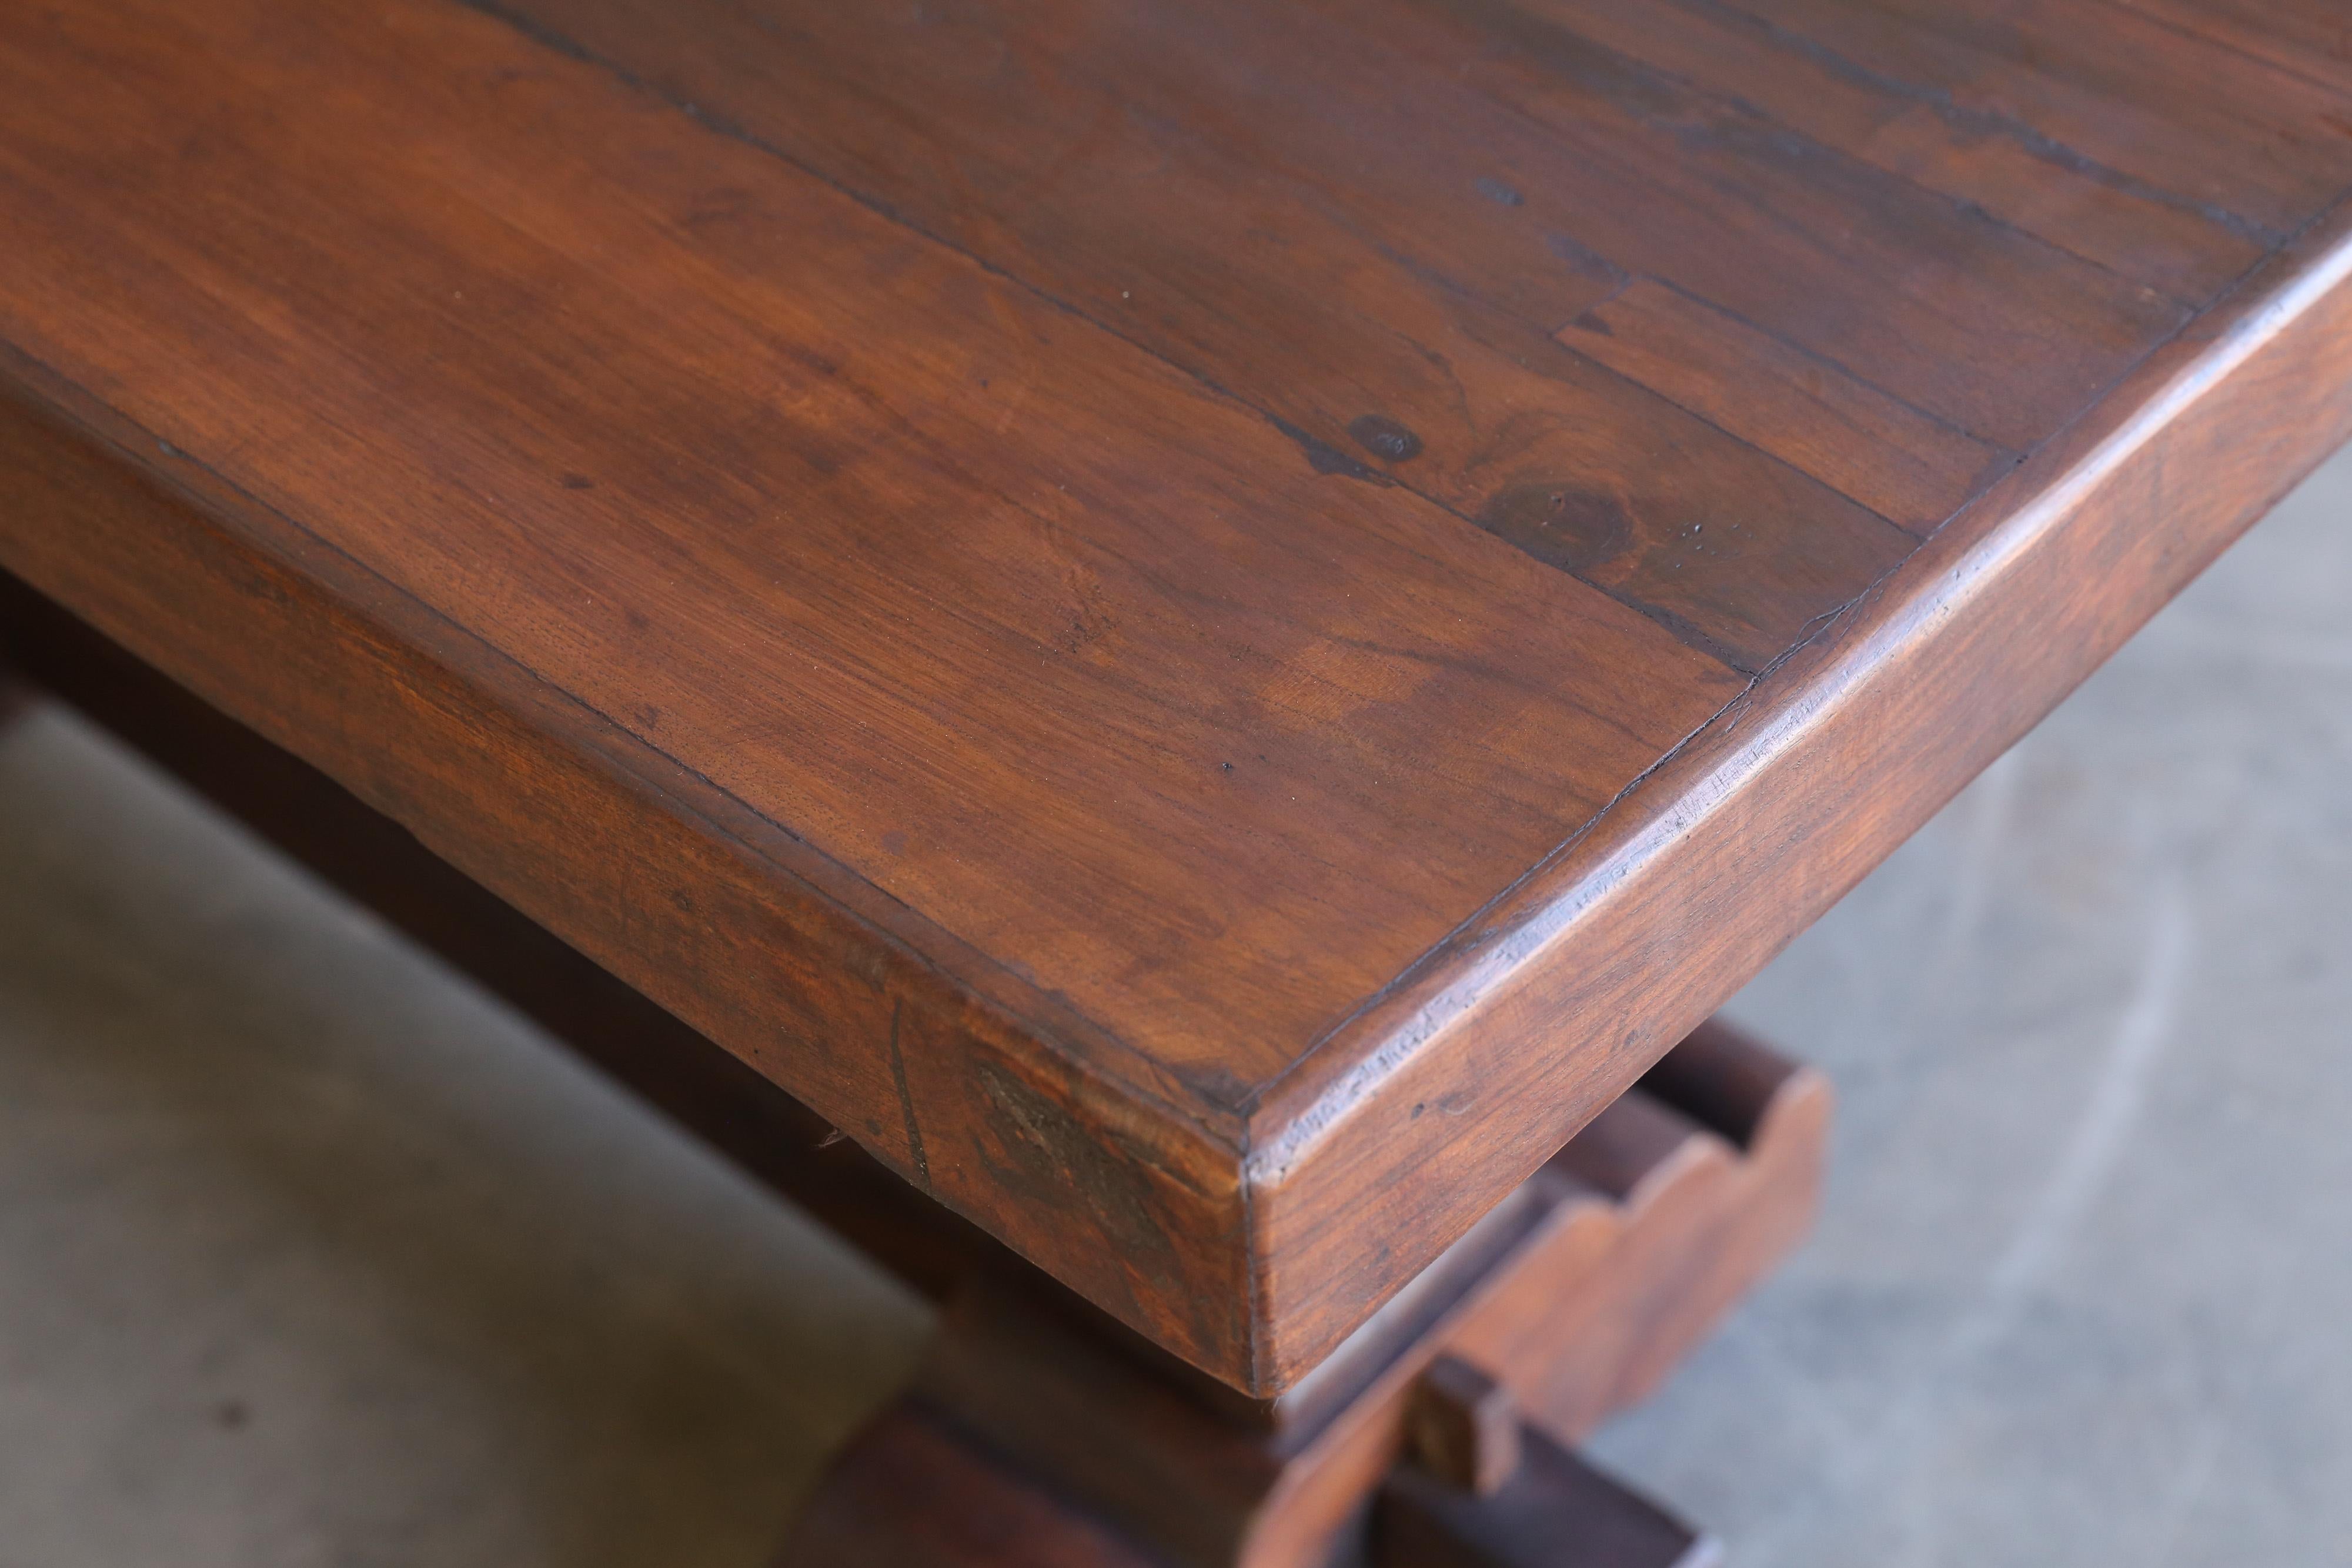 Indian Early 20th Century Solid Teak Wood Pedestal Dining Table from a Settler's Home